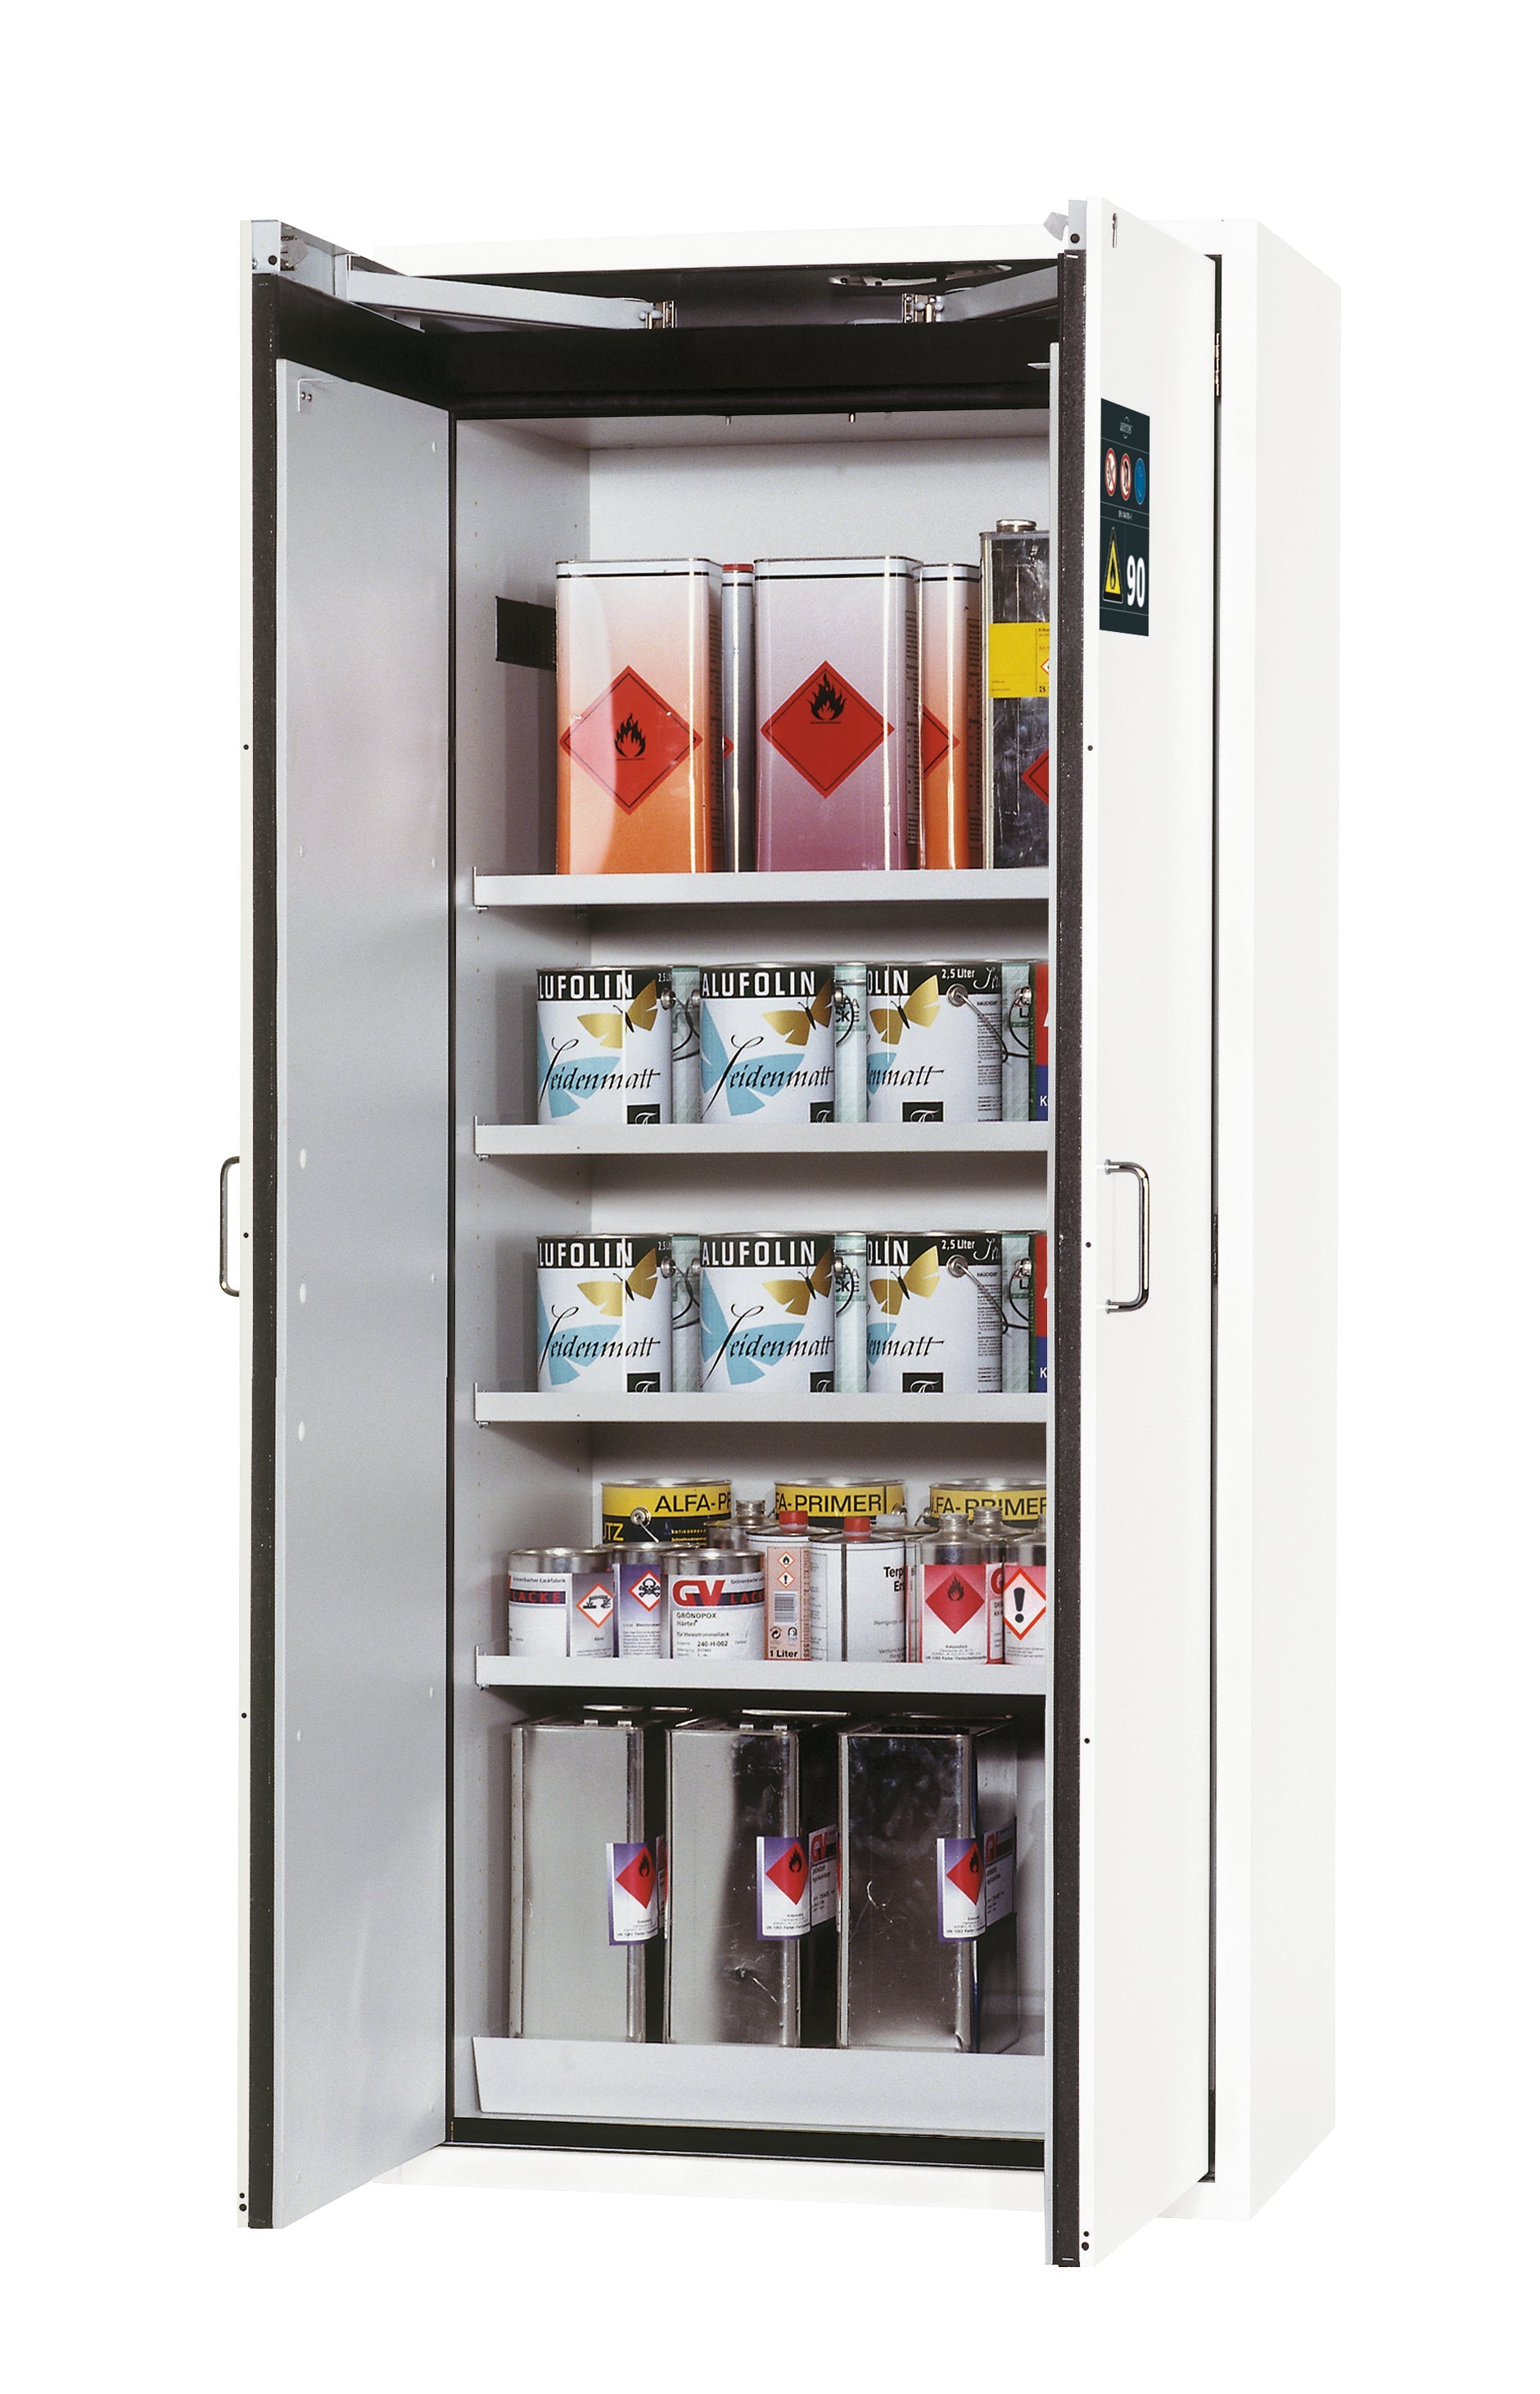 Type 90 safety cabinet S-CLASSIC-90 model S90.196.090.WDAS in laboratory white (similar to RAL 9016) with 4x standard shelves (sheet steel)